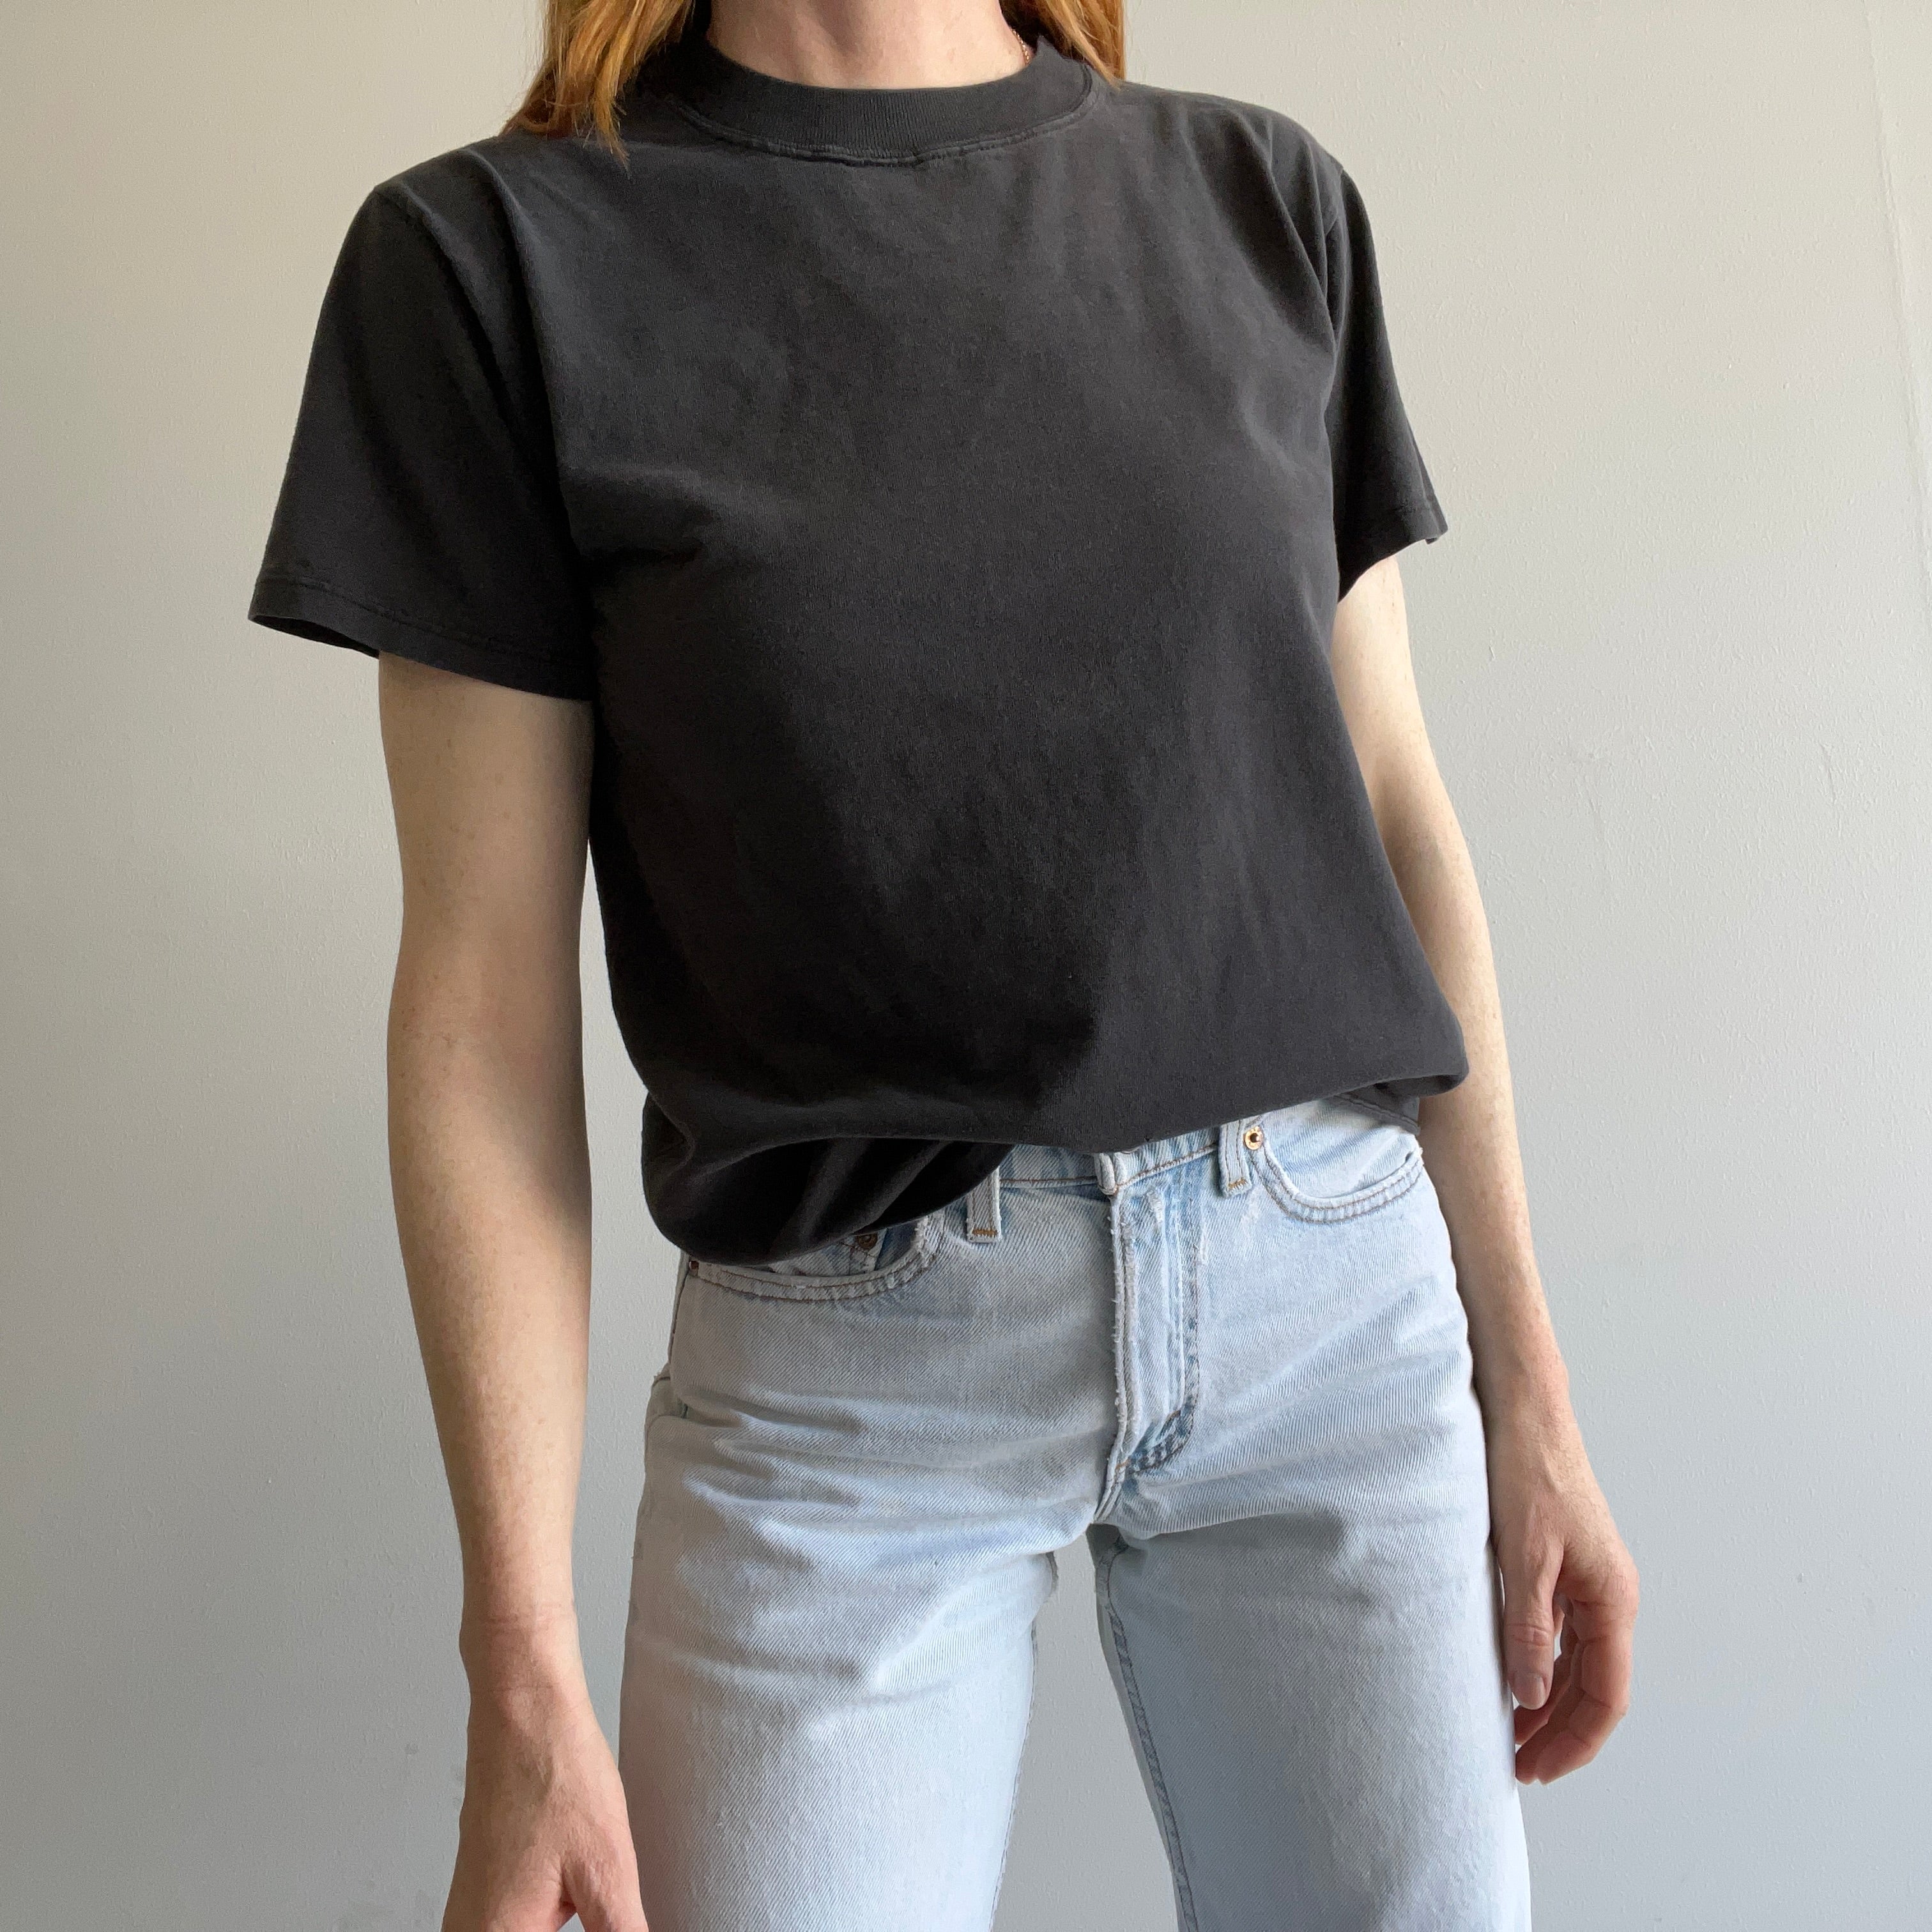 1980/90s Faded Blank Black T-Shirt by Russell